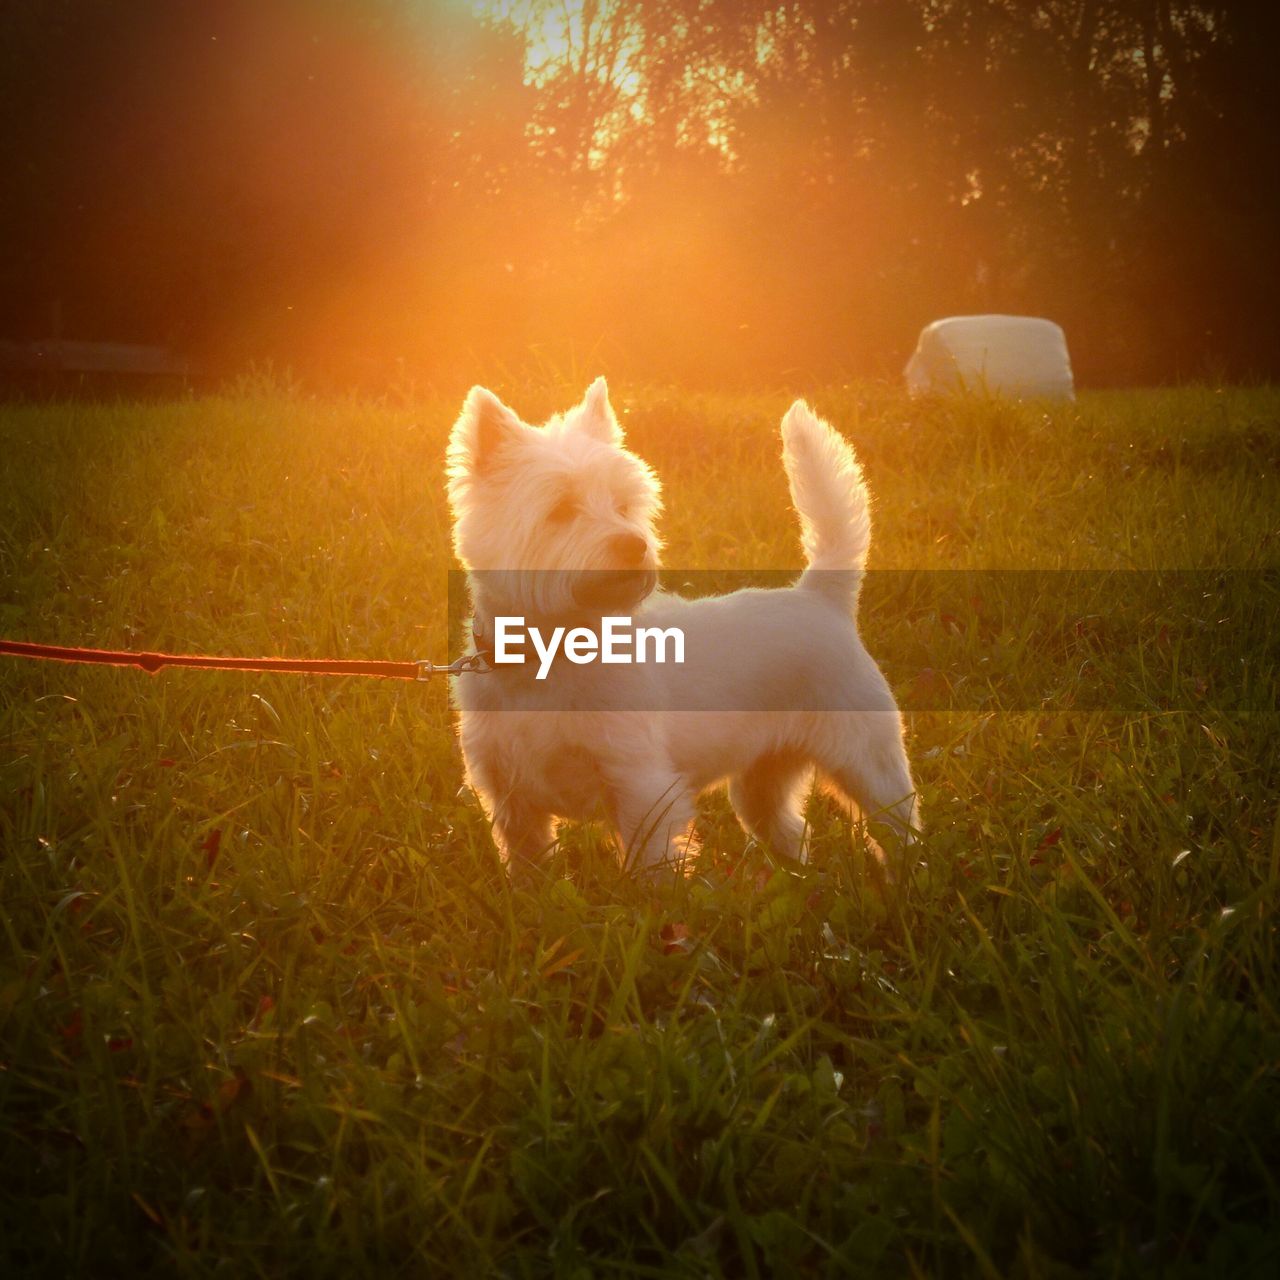 Dog in grass at sunset